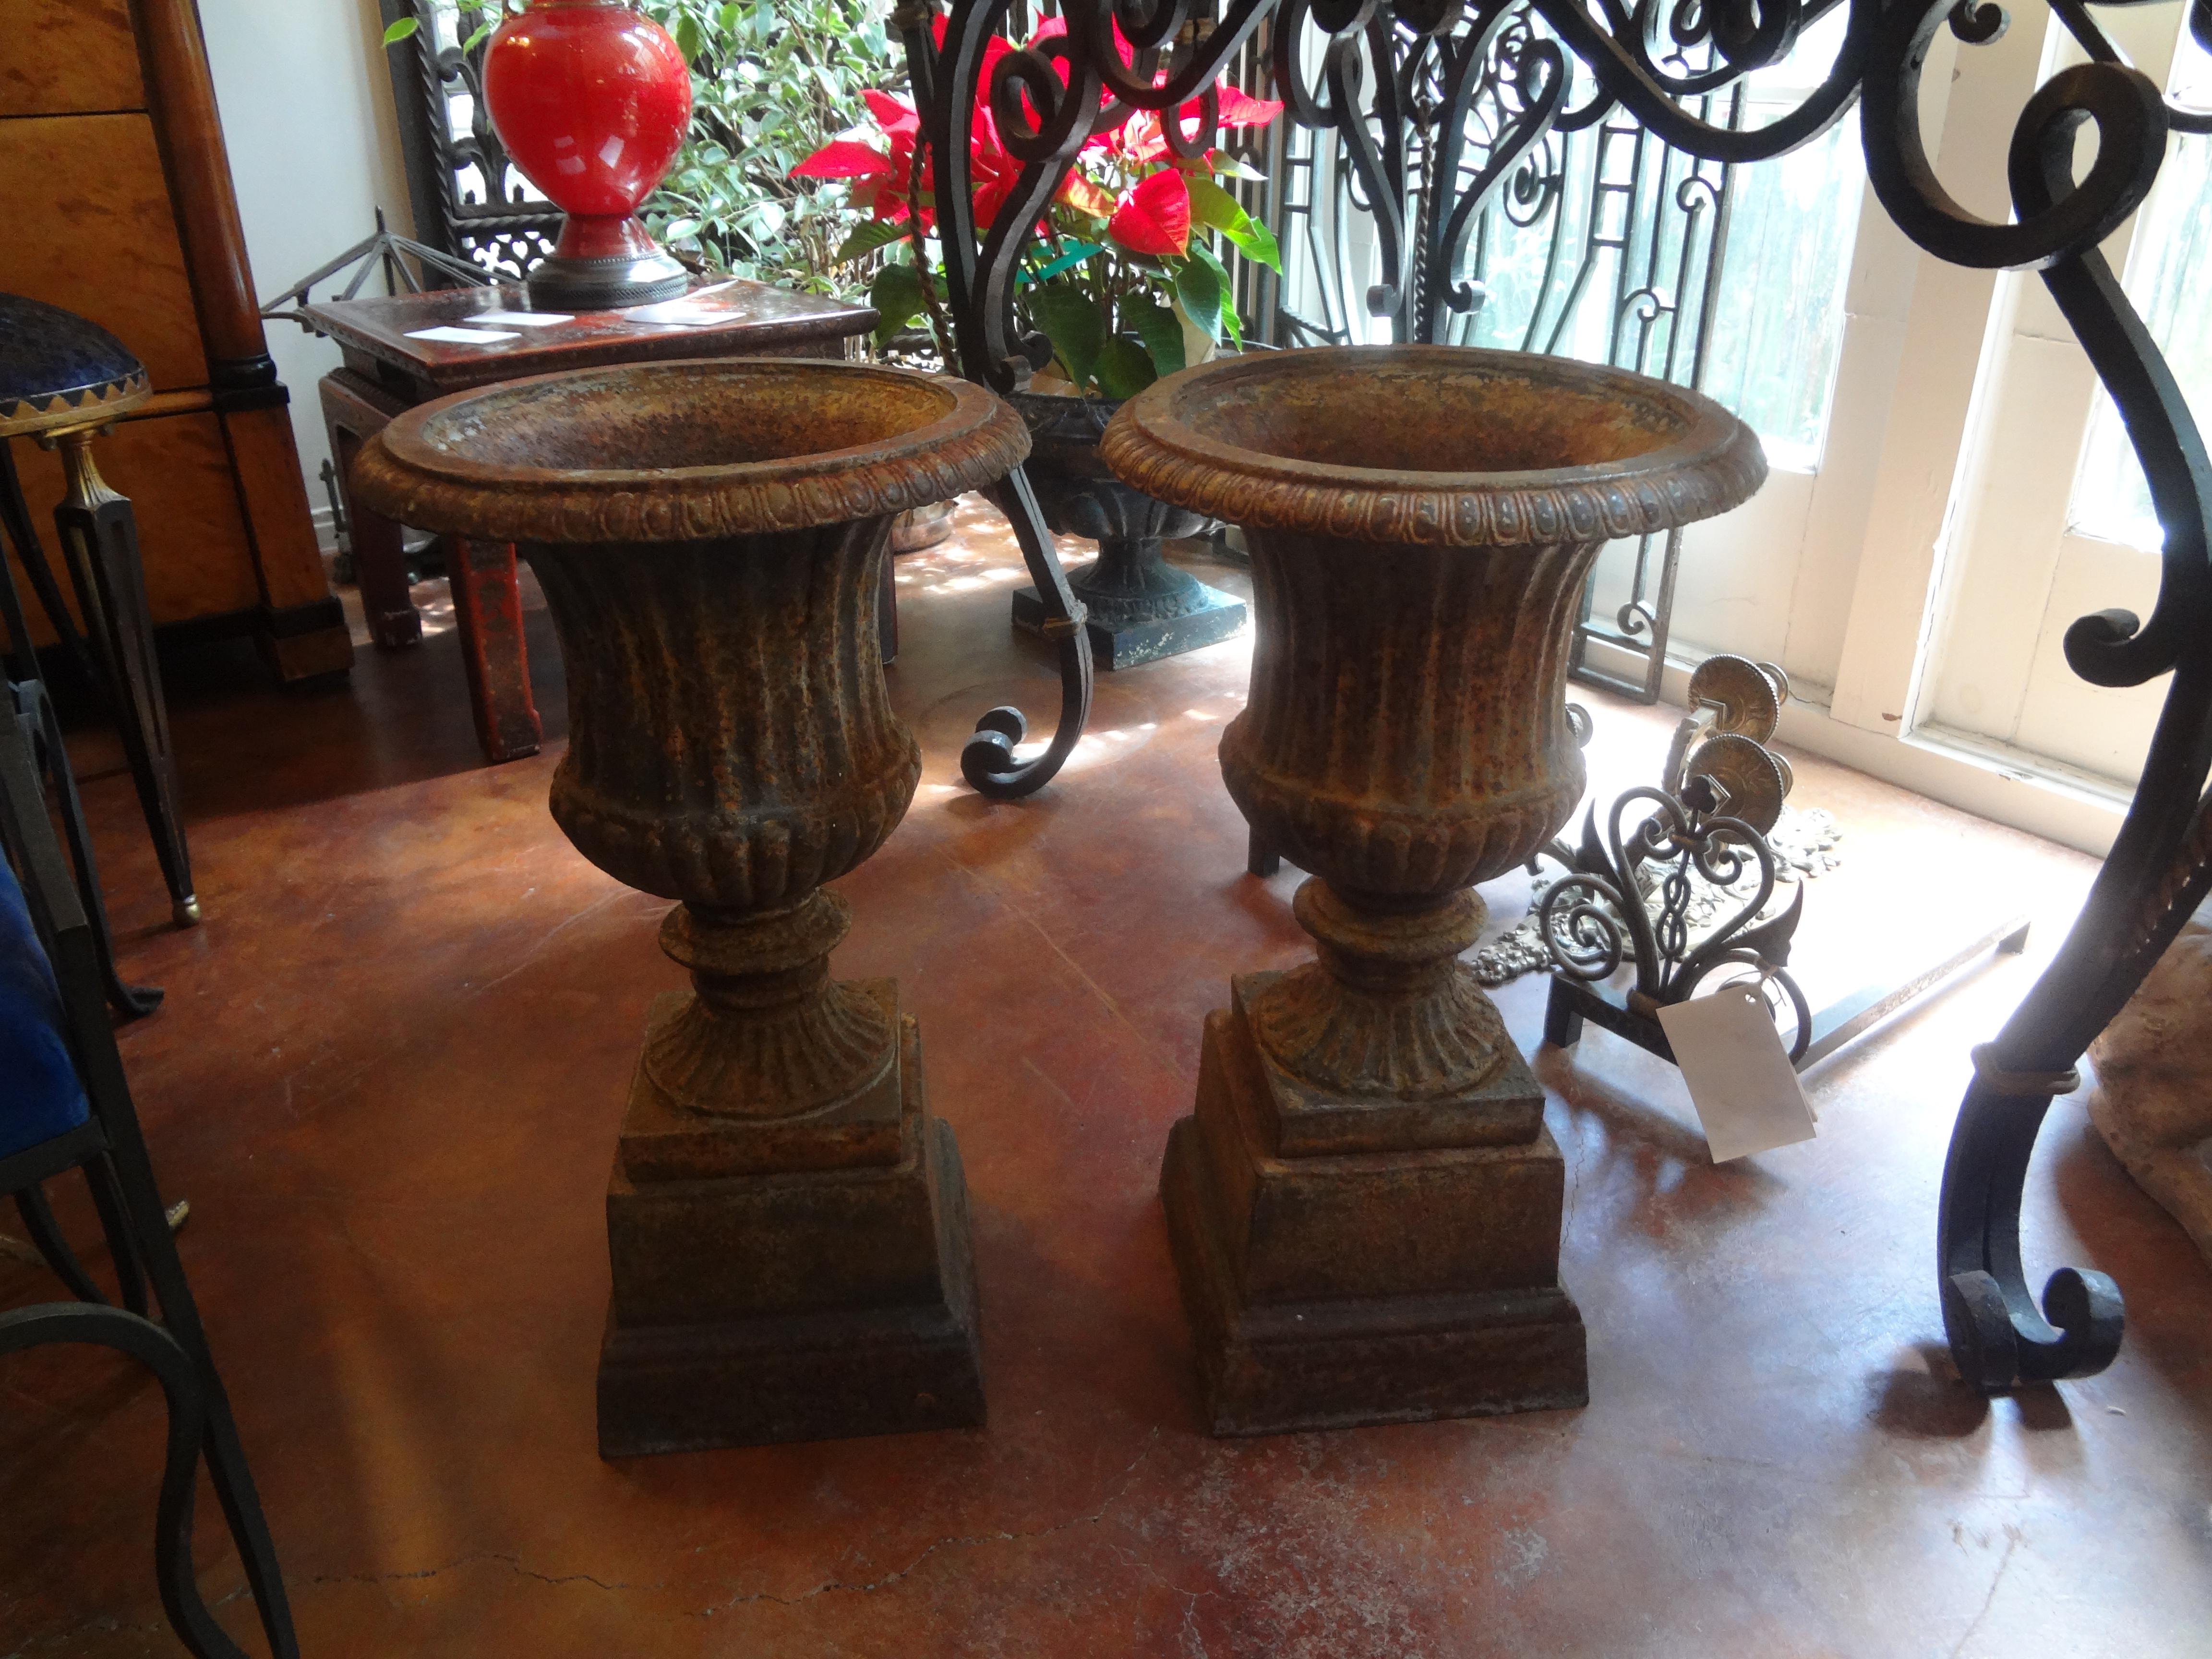 Pair of 19th Century French Neoclassical Style Iron Urns on Plinths For Sale 2